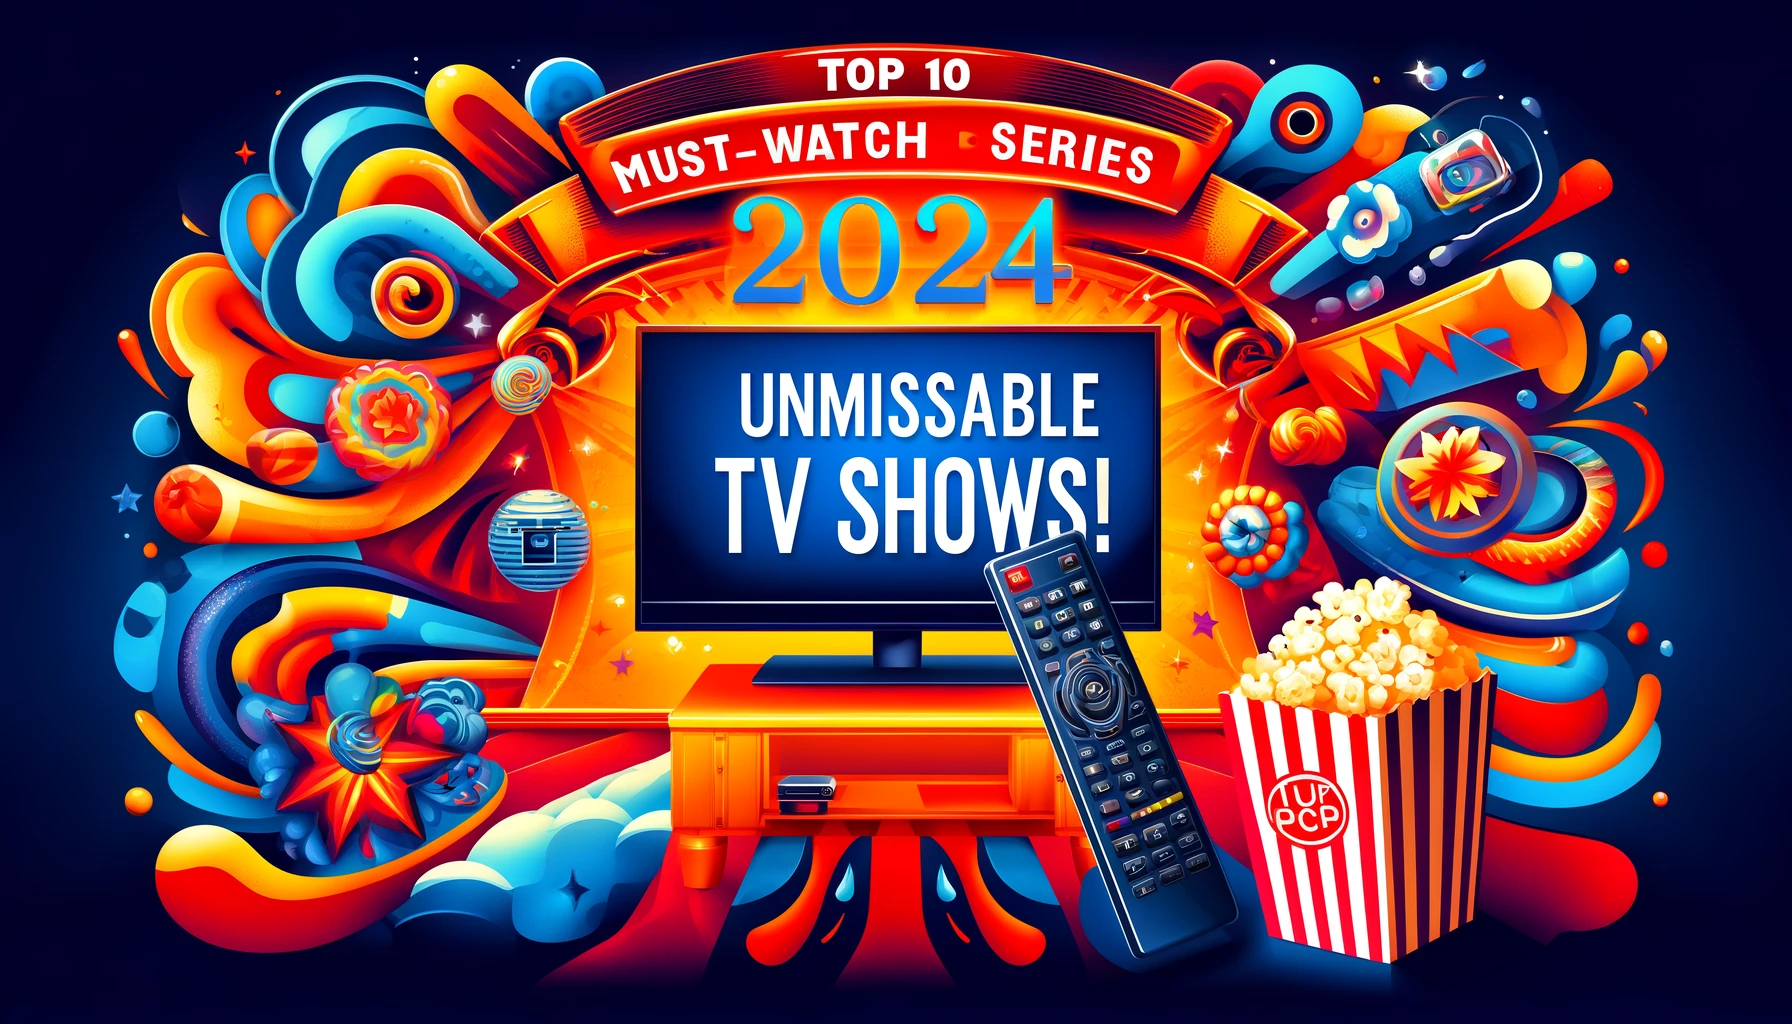 10 Must-Watch Series in June 2024: Unmissable TV Shows!